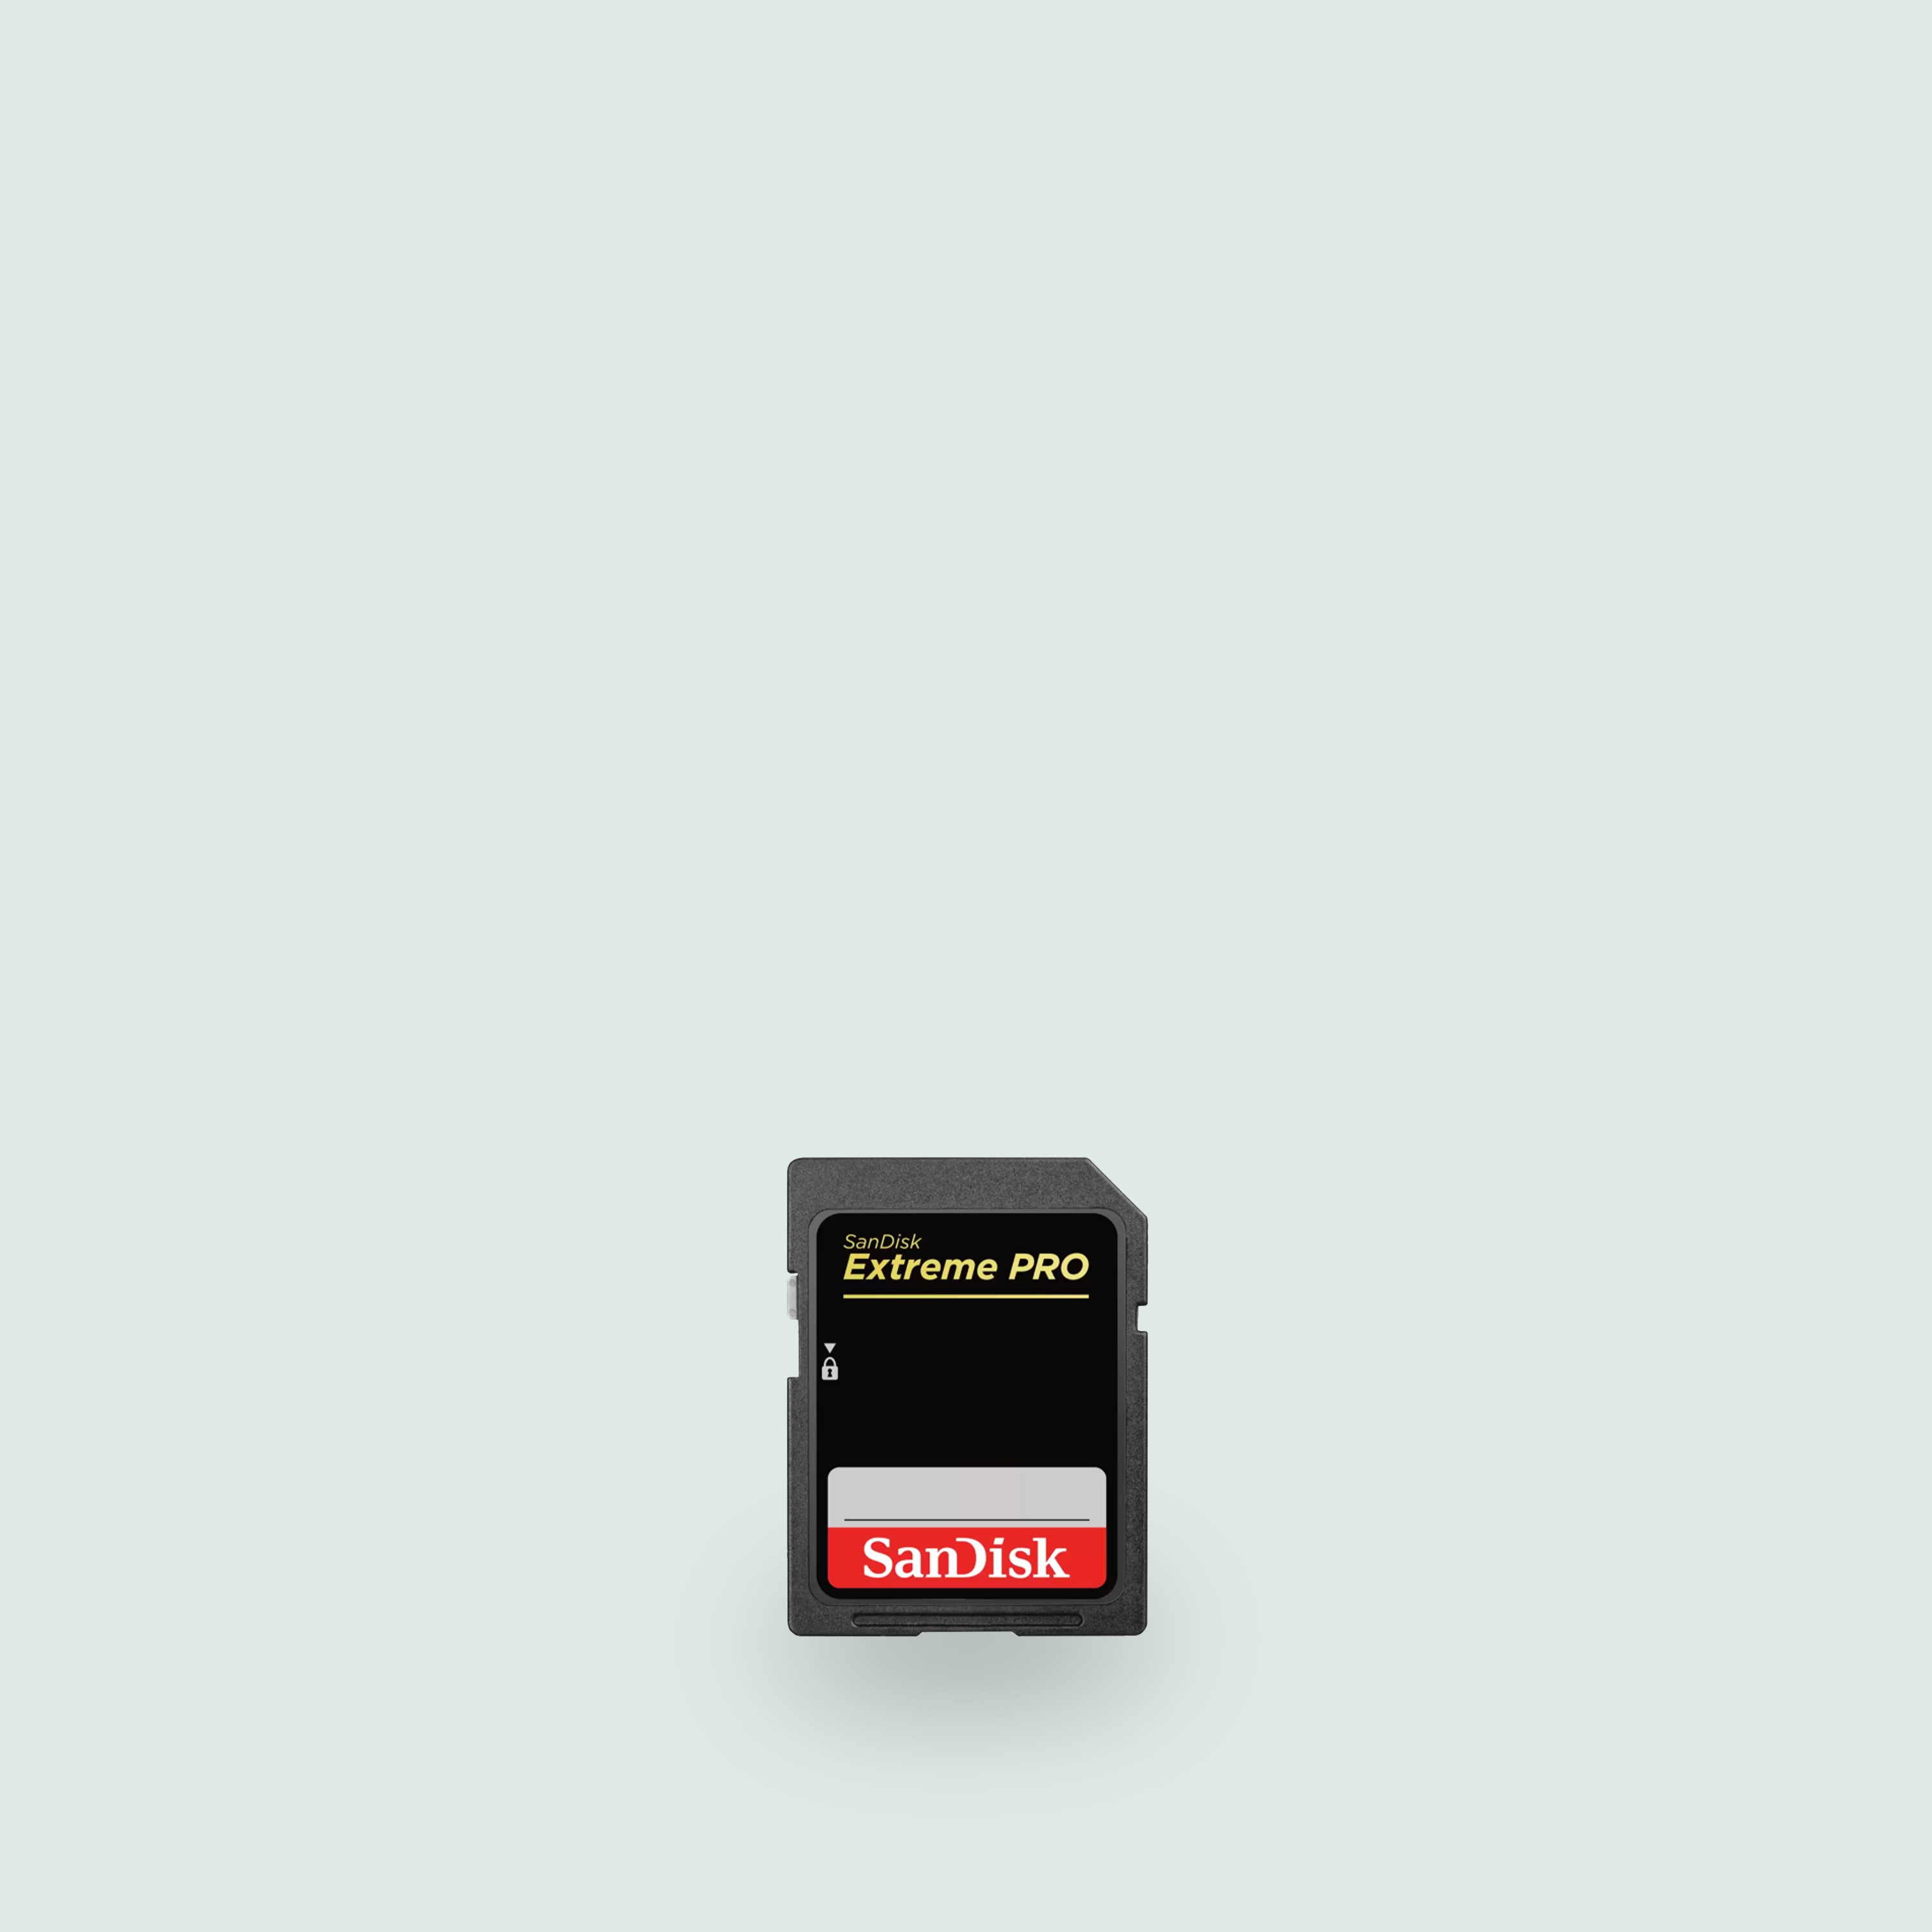 SanDisk Extreme PRO SDXC 128G UHS-II- 260MB/s R 300MB/s W